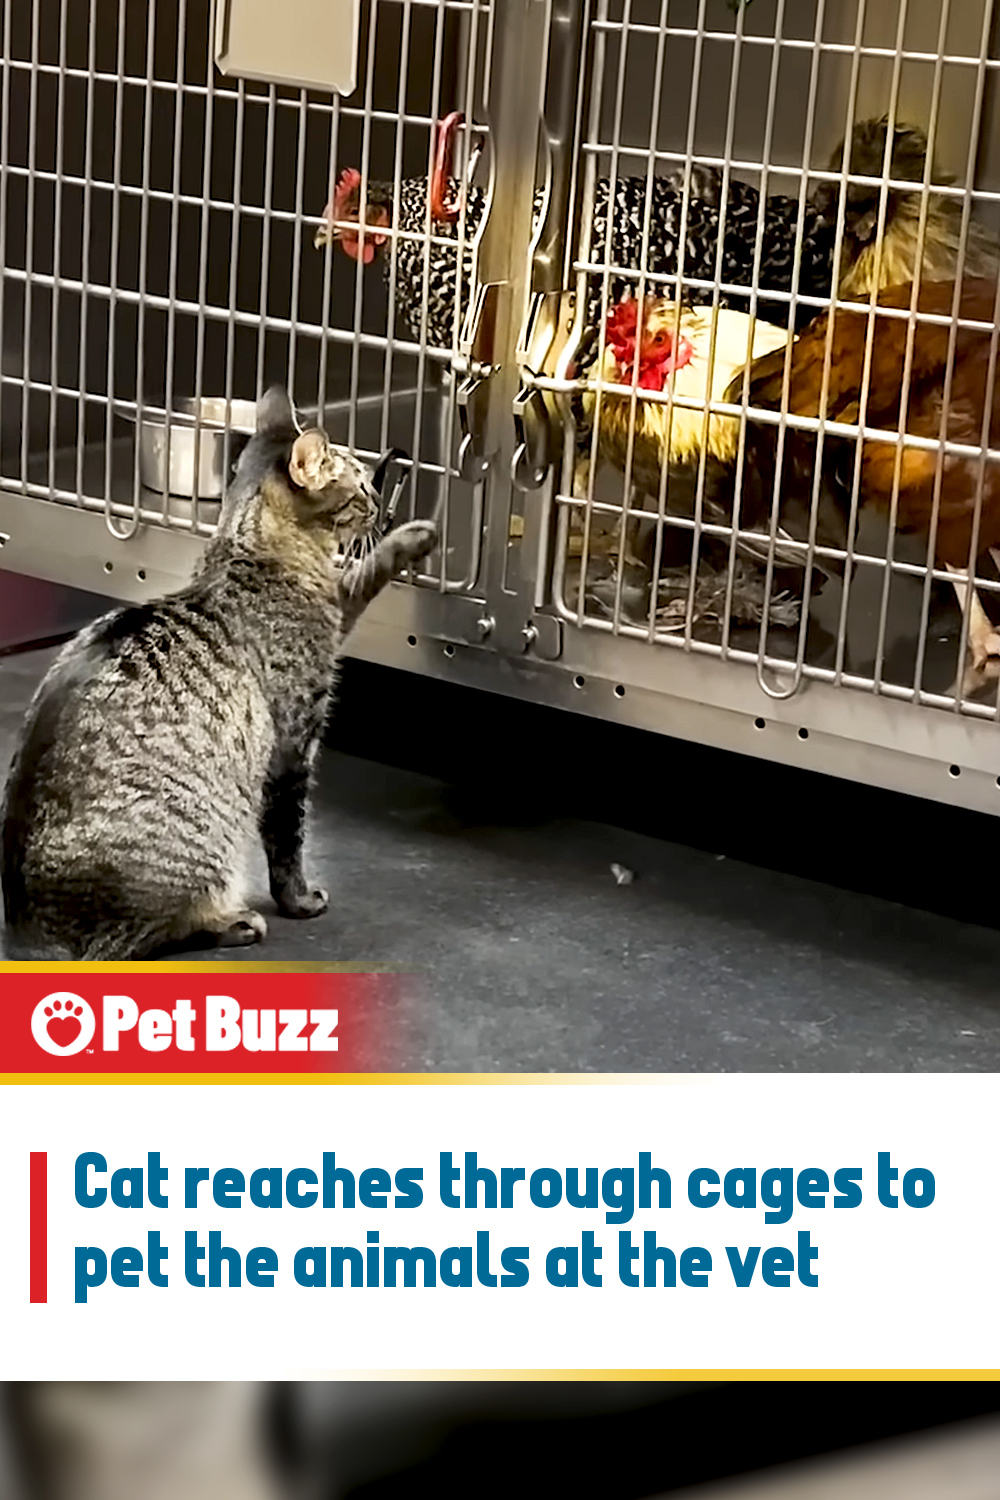 Cat reaches through cages to pet the animals at the vet